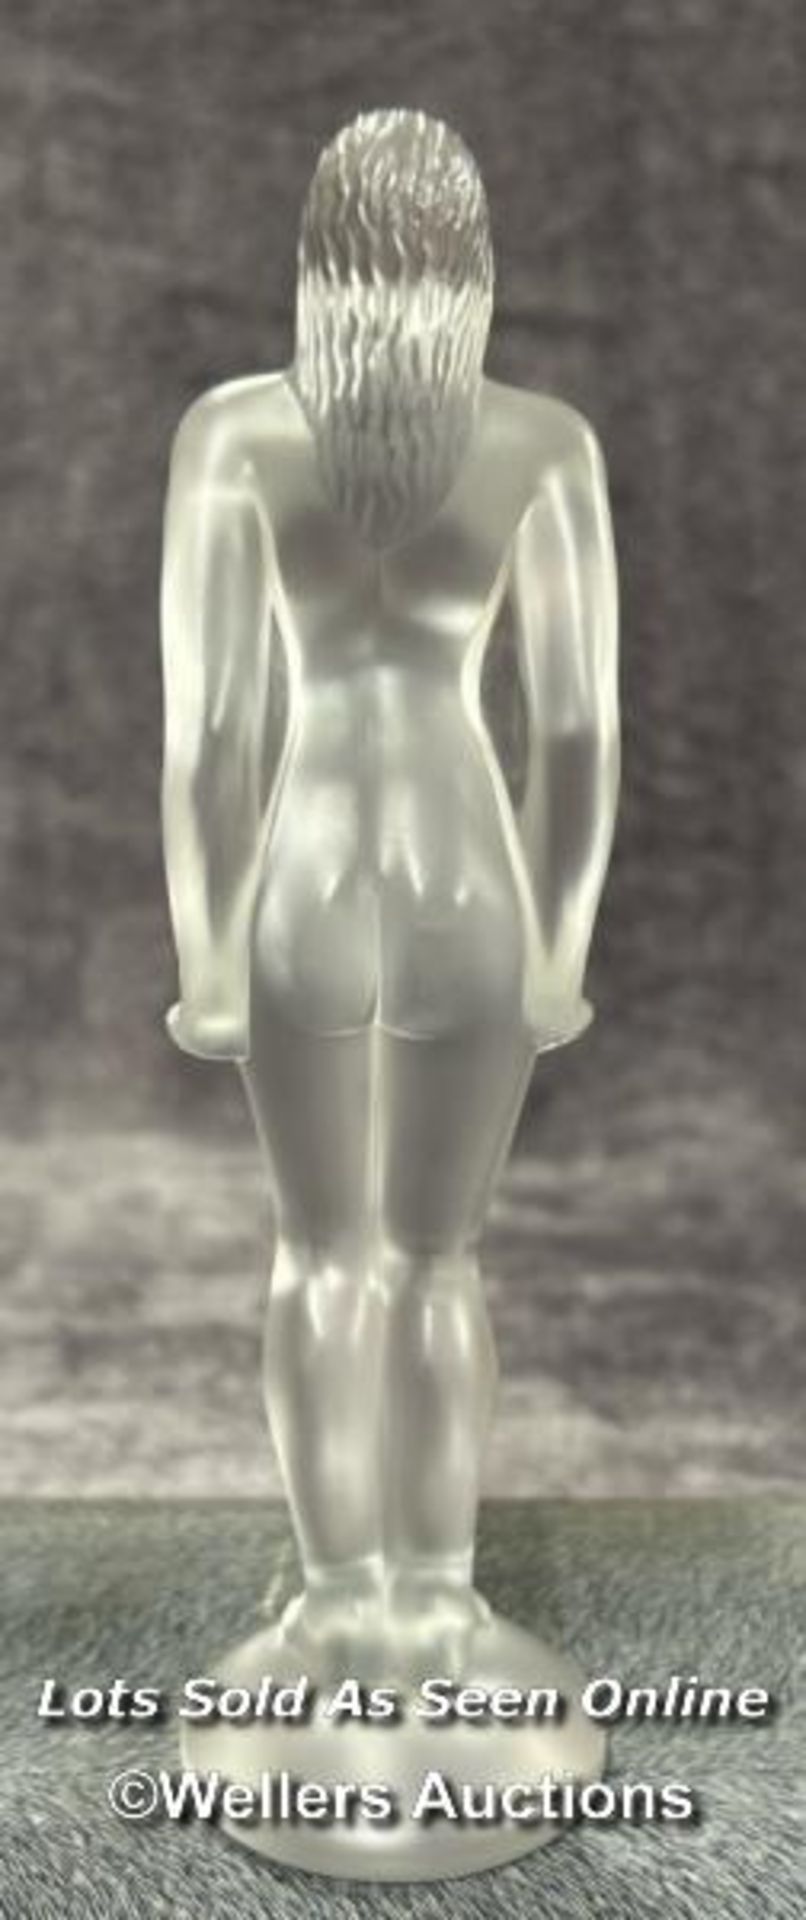 Lalique frosted crystal figurine 'Josephine' signed at the base, 19cm high / AN2 - Image 3 of 4